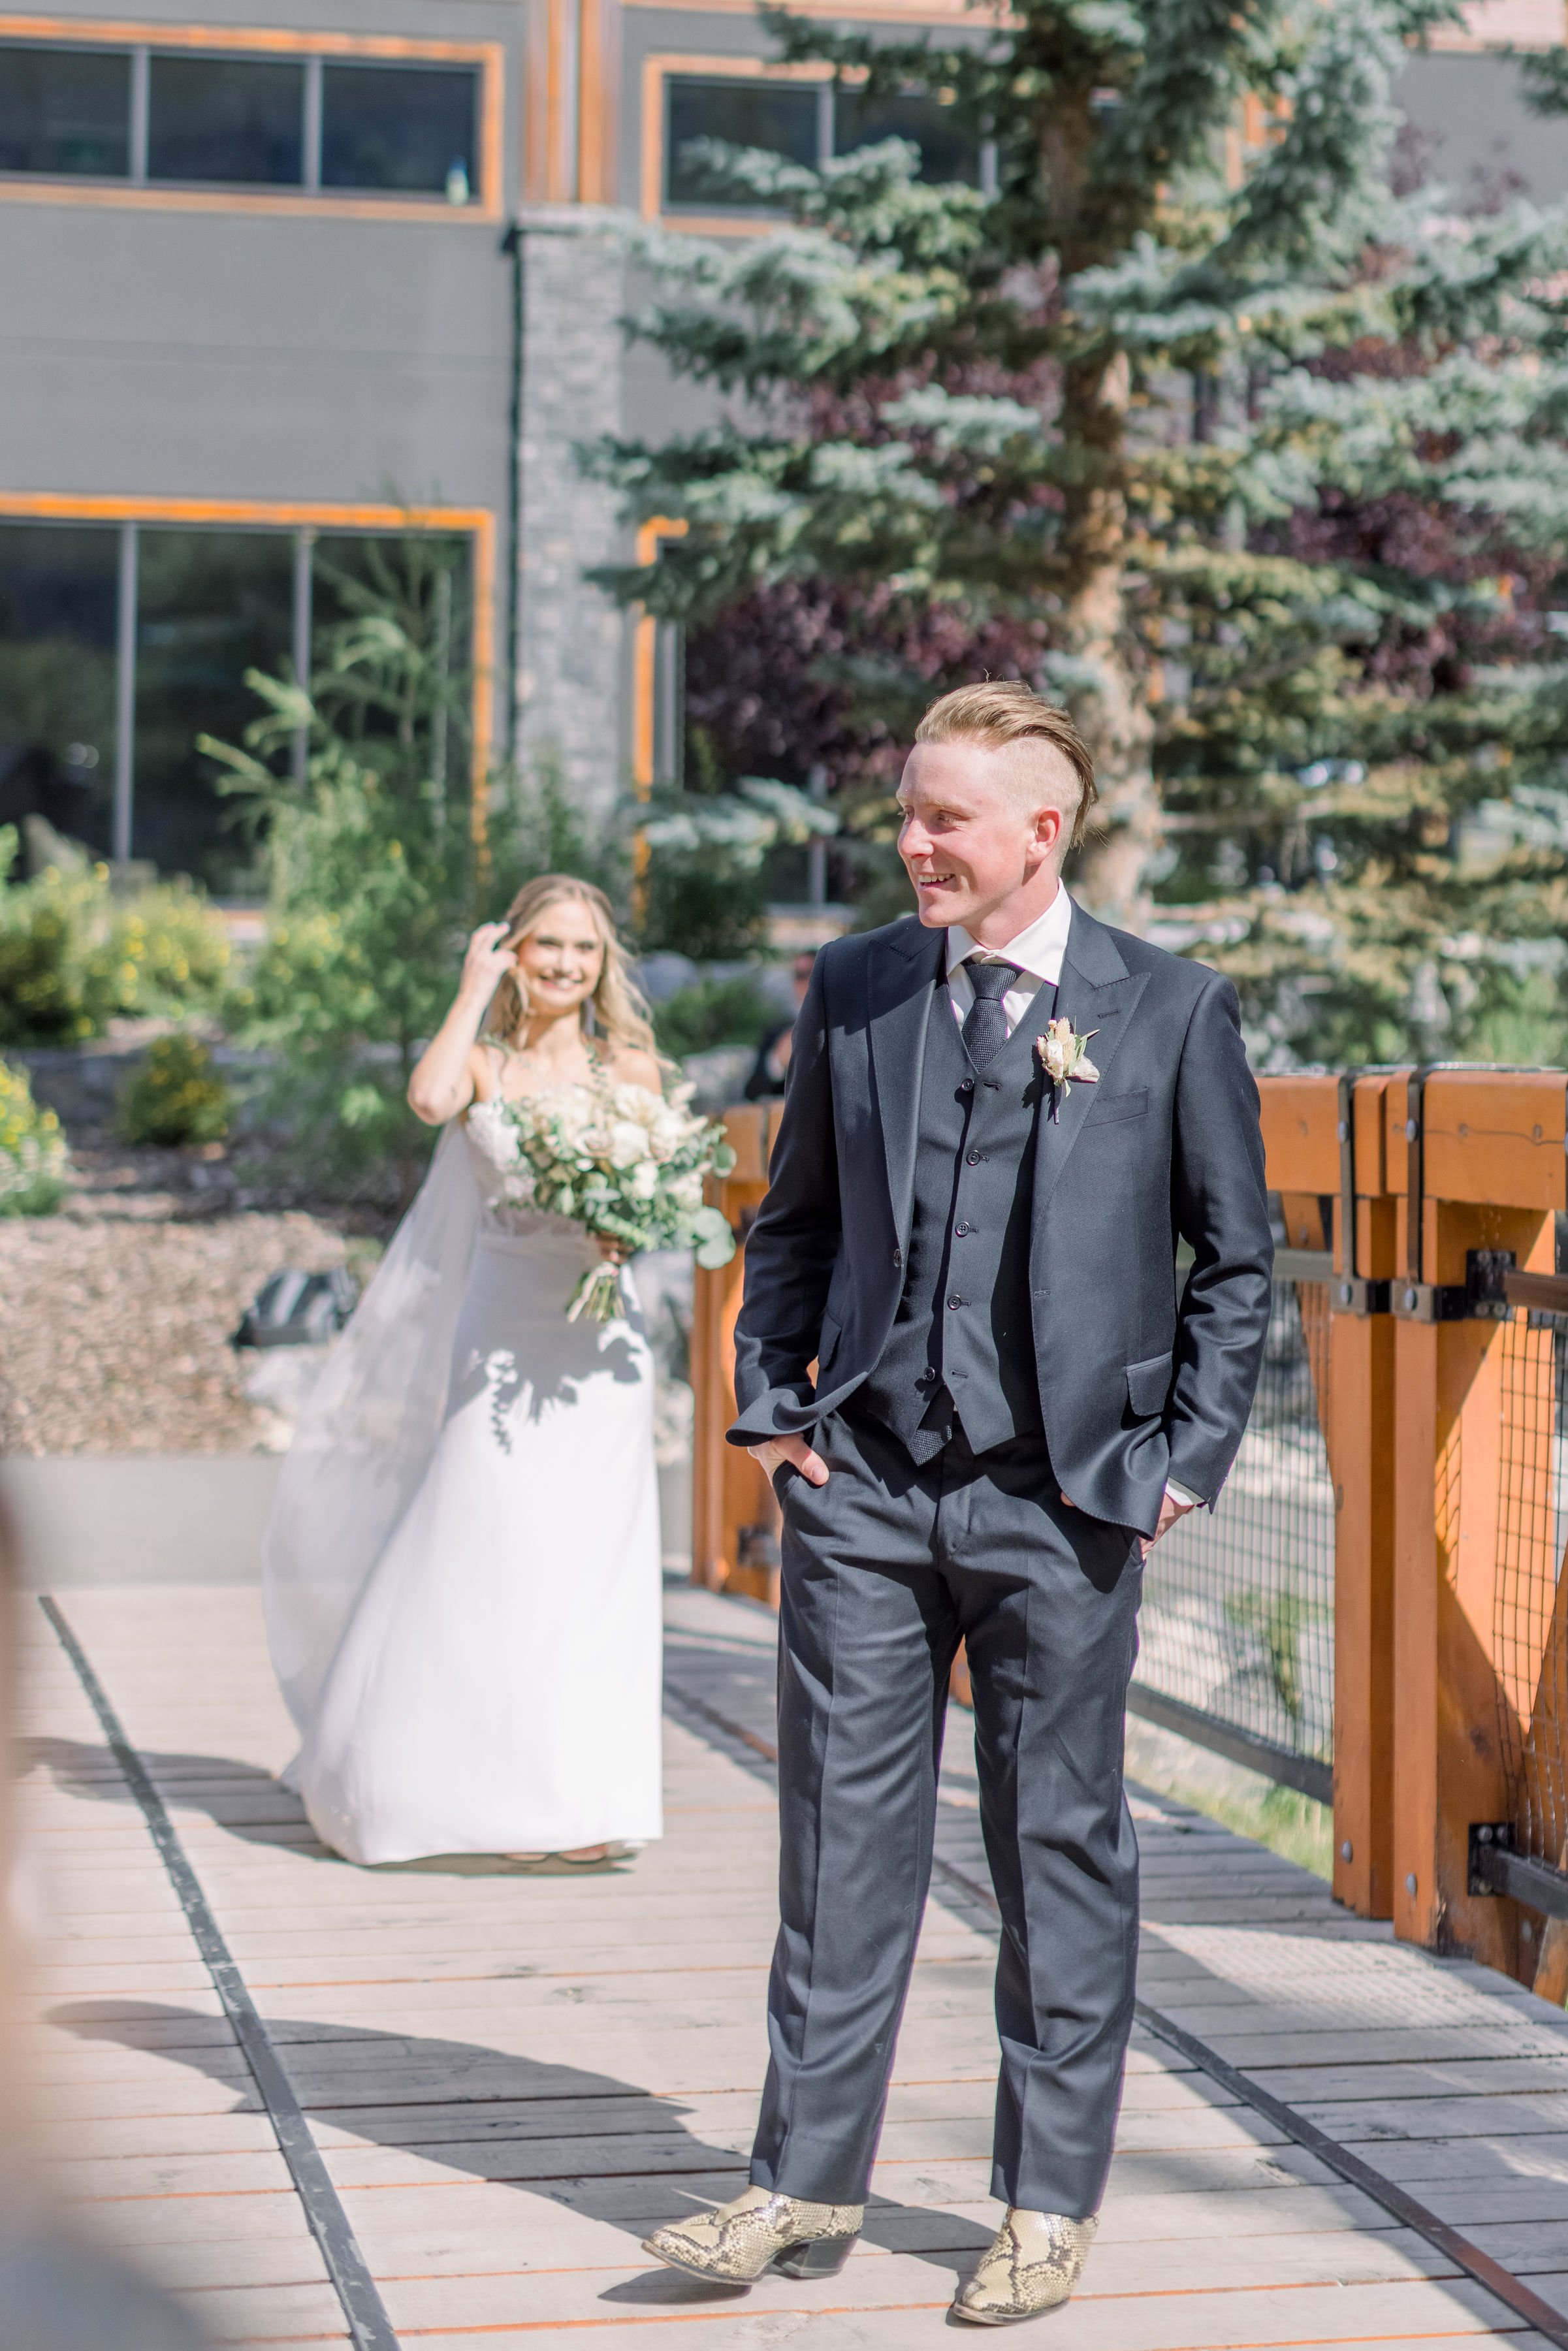  Groom stands getting ready for the first look at his bride-to-be by Chelsea Mason Photography. mountain wedding Canada #Albertaweddings #shesaidyes #Albertaweddingphotographers #SilvertipGolfCourse #ChelseaMasonPhotography #ChelseaMasonWeddings  